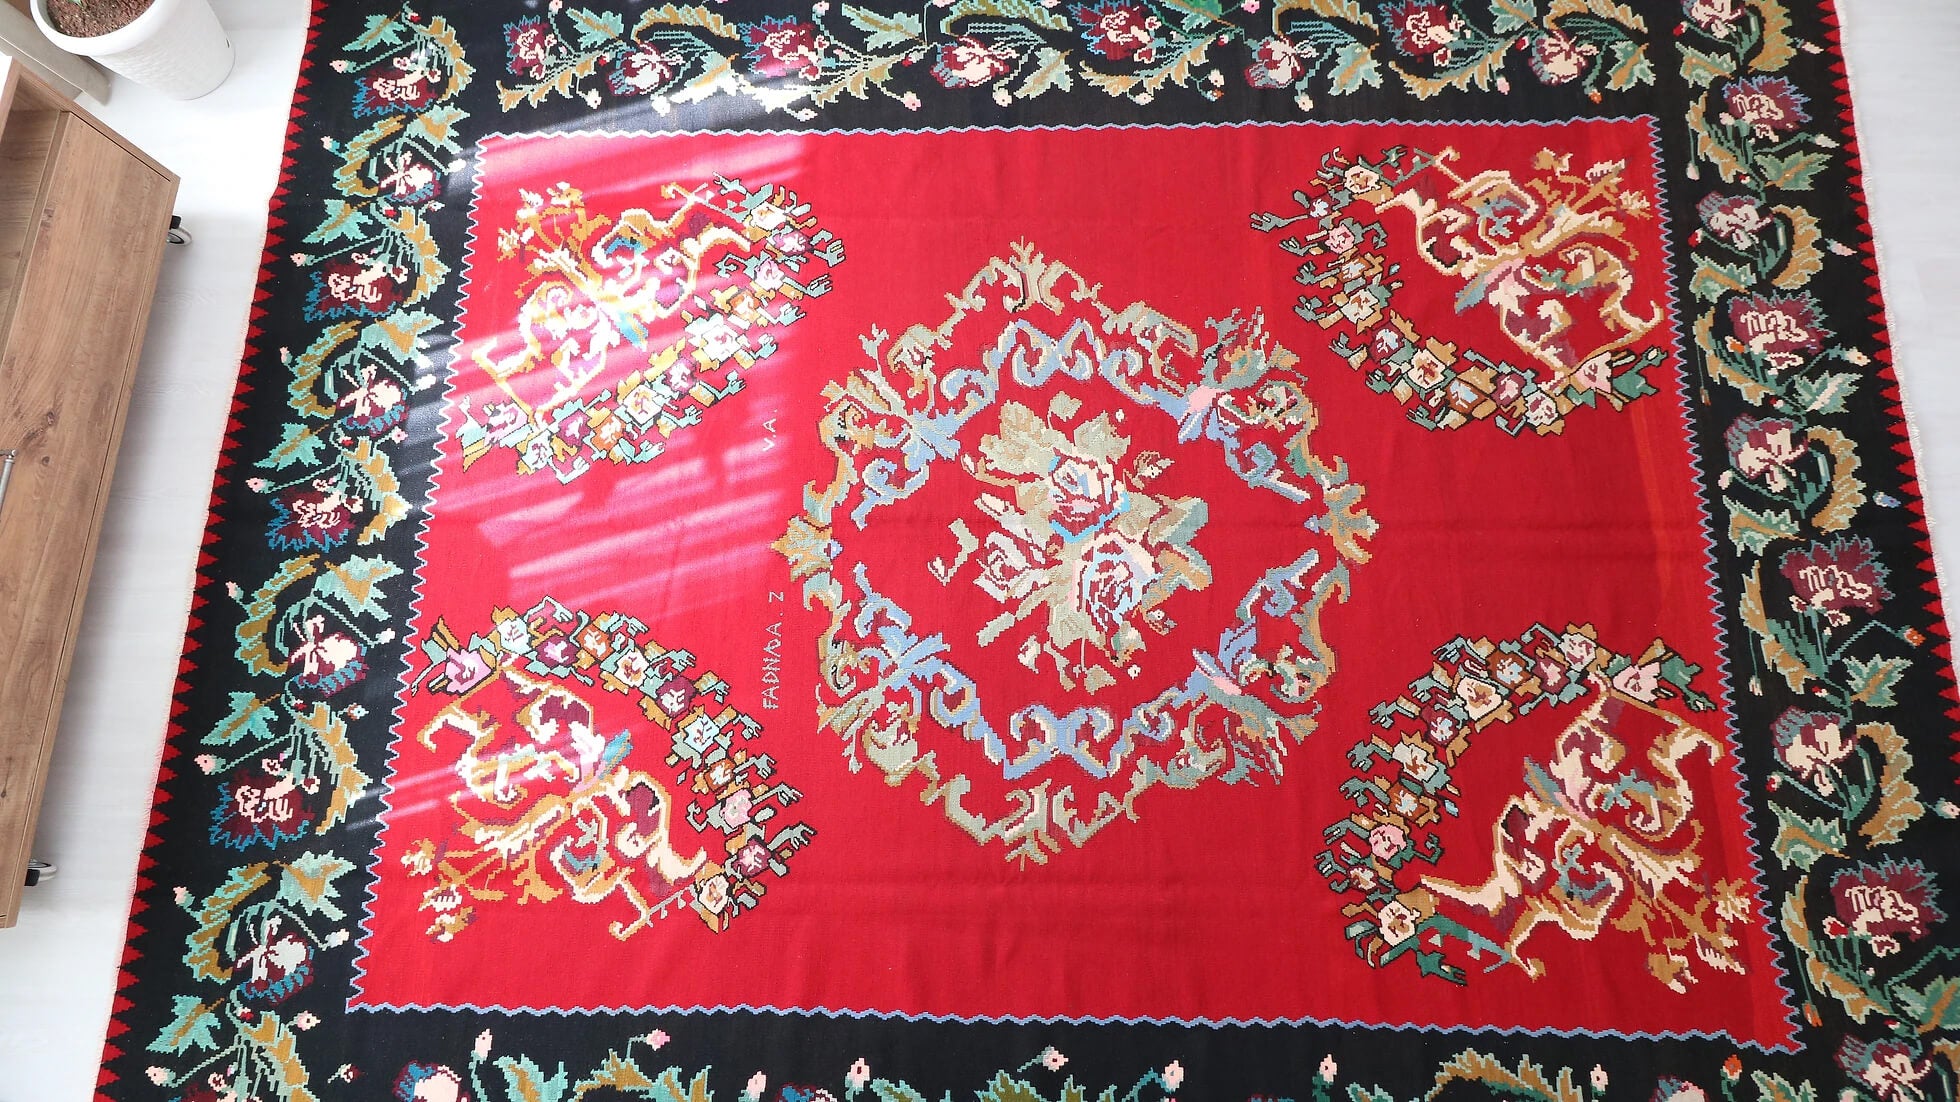 Vintage Handwoven Bessarabian Kilim Rug in red shades with floral design signed by the artisan